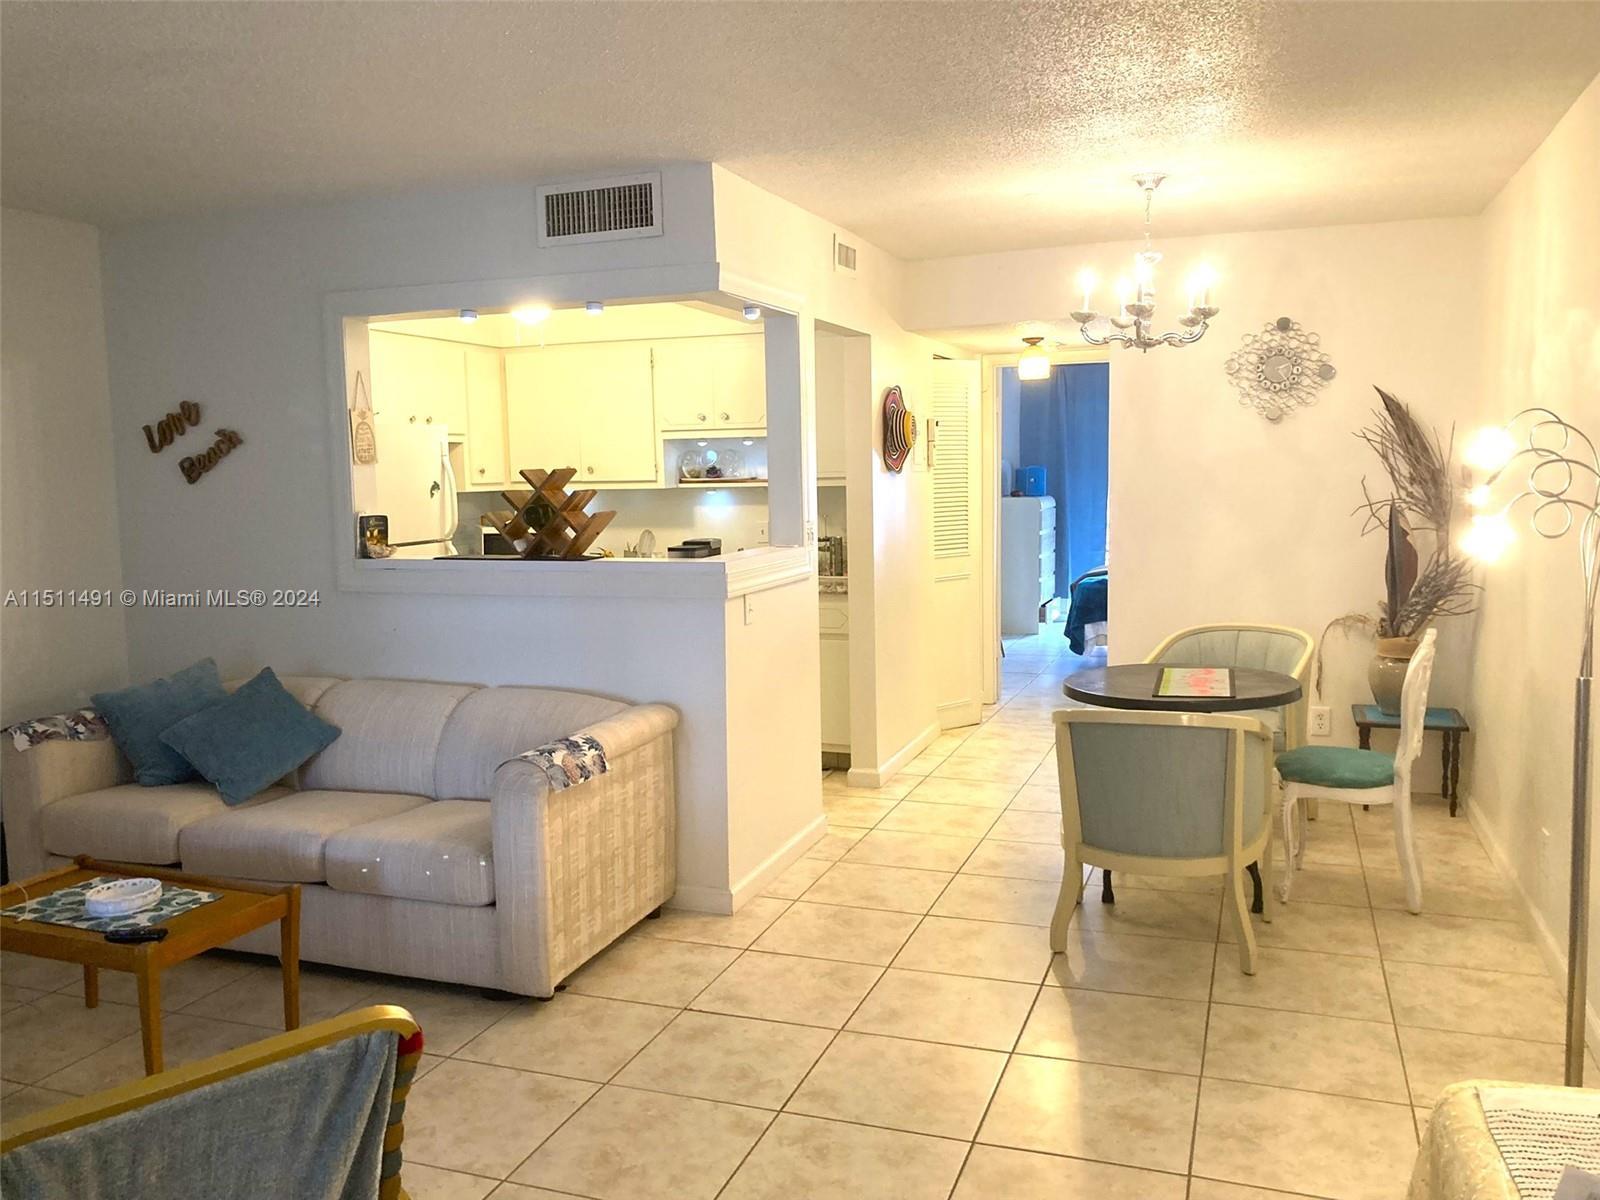 Photo of 2901 NW 47th Ter #344B in Lauderdale Lakes, FL